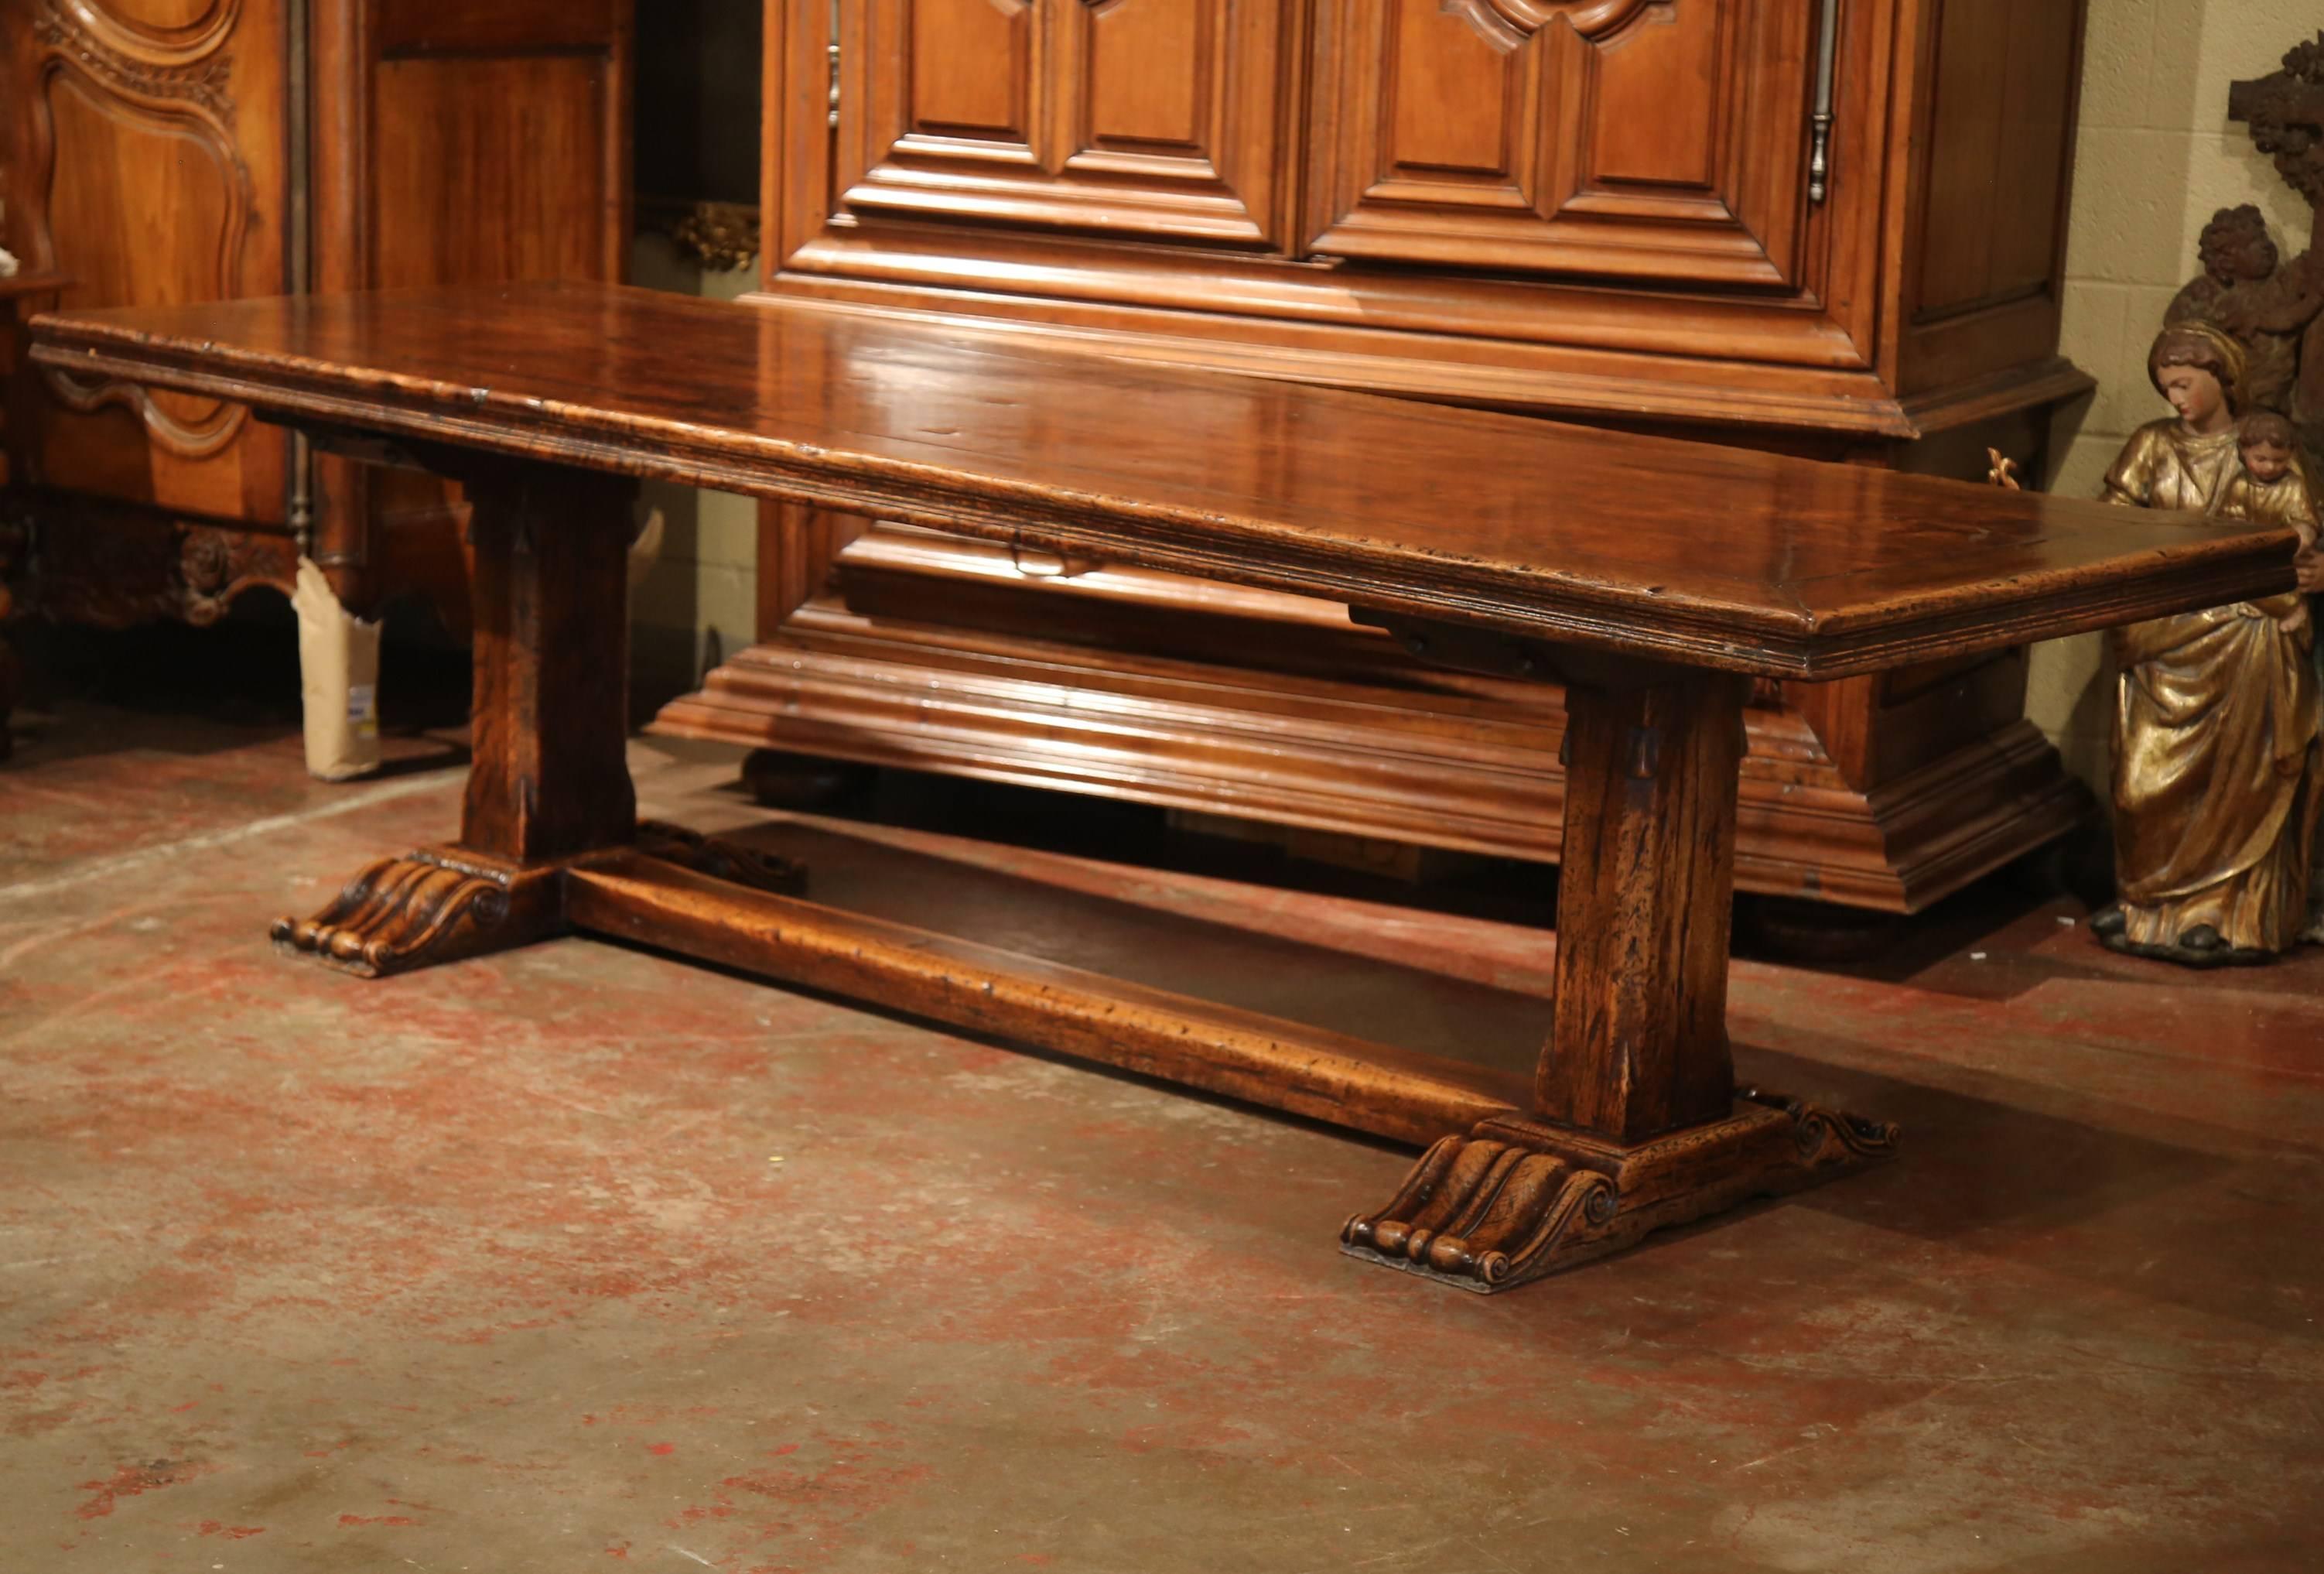 Louis XIII French Carved Chestnut and Oak Trestle Dining Table from the Pyrenees (Kastanienholz)